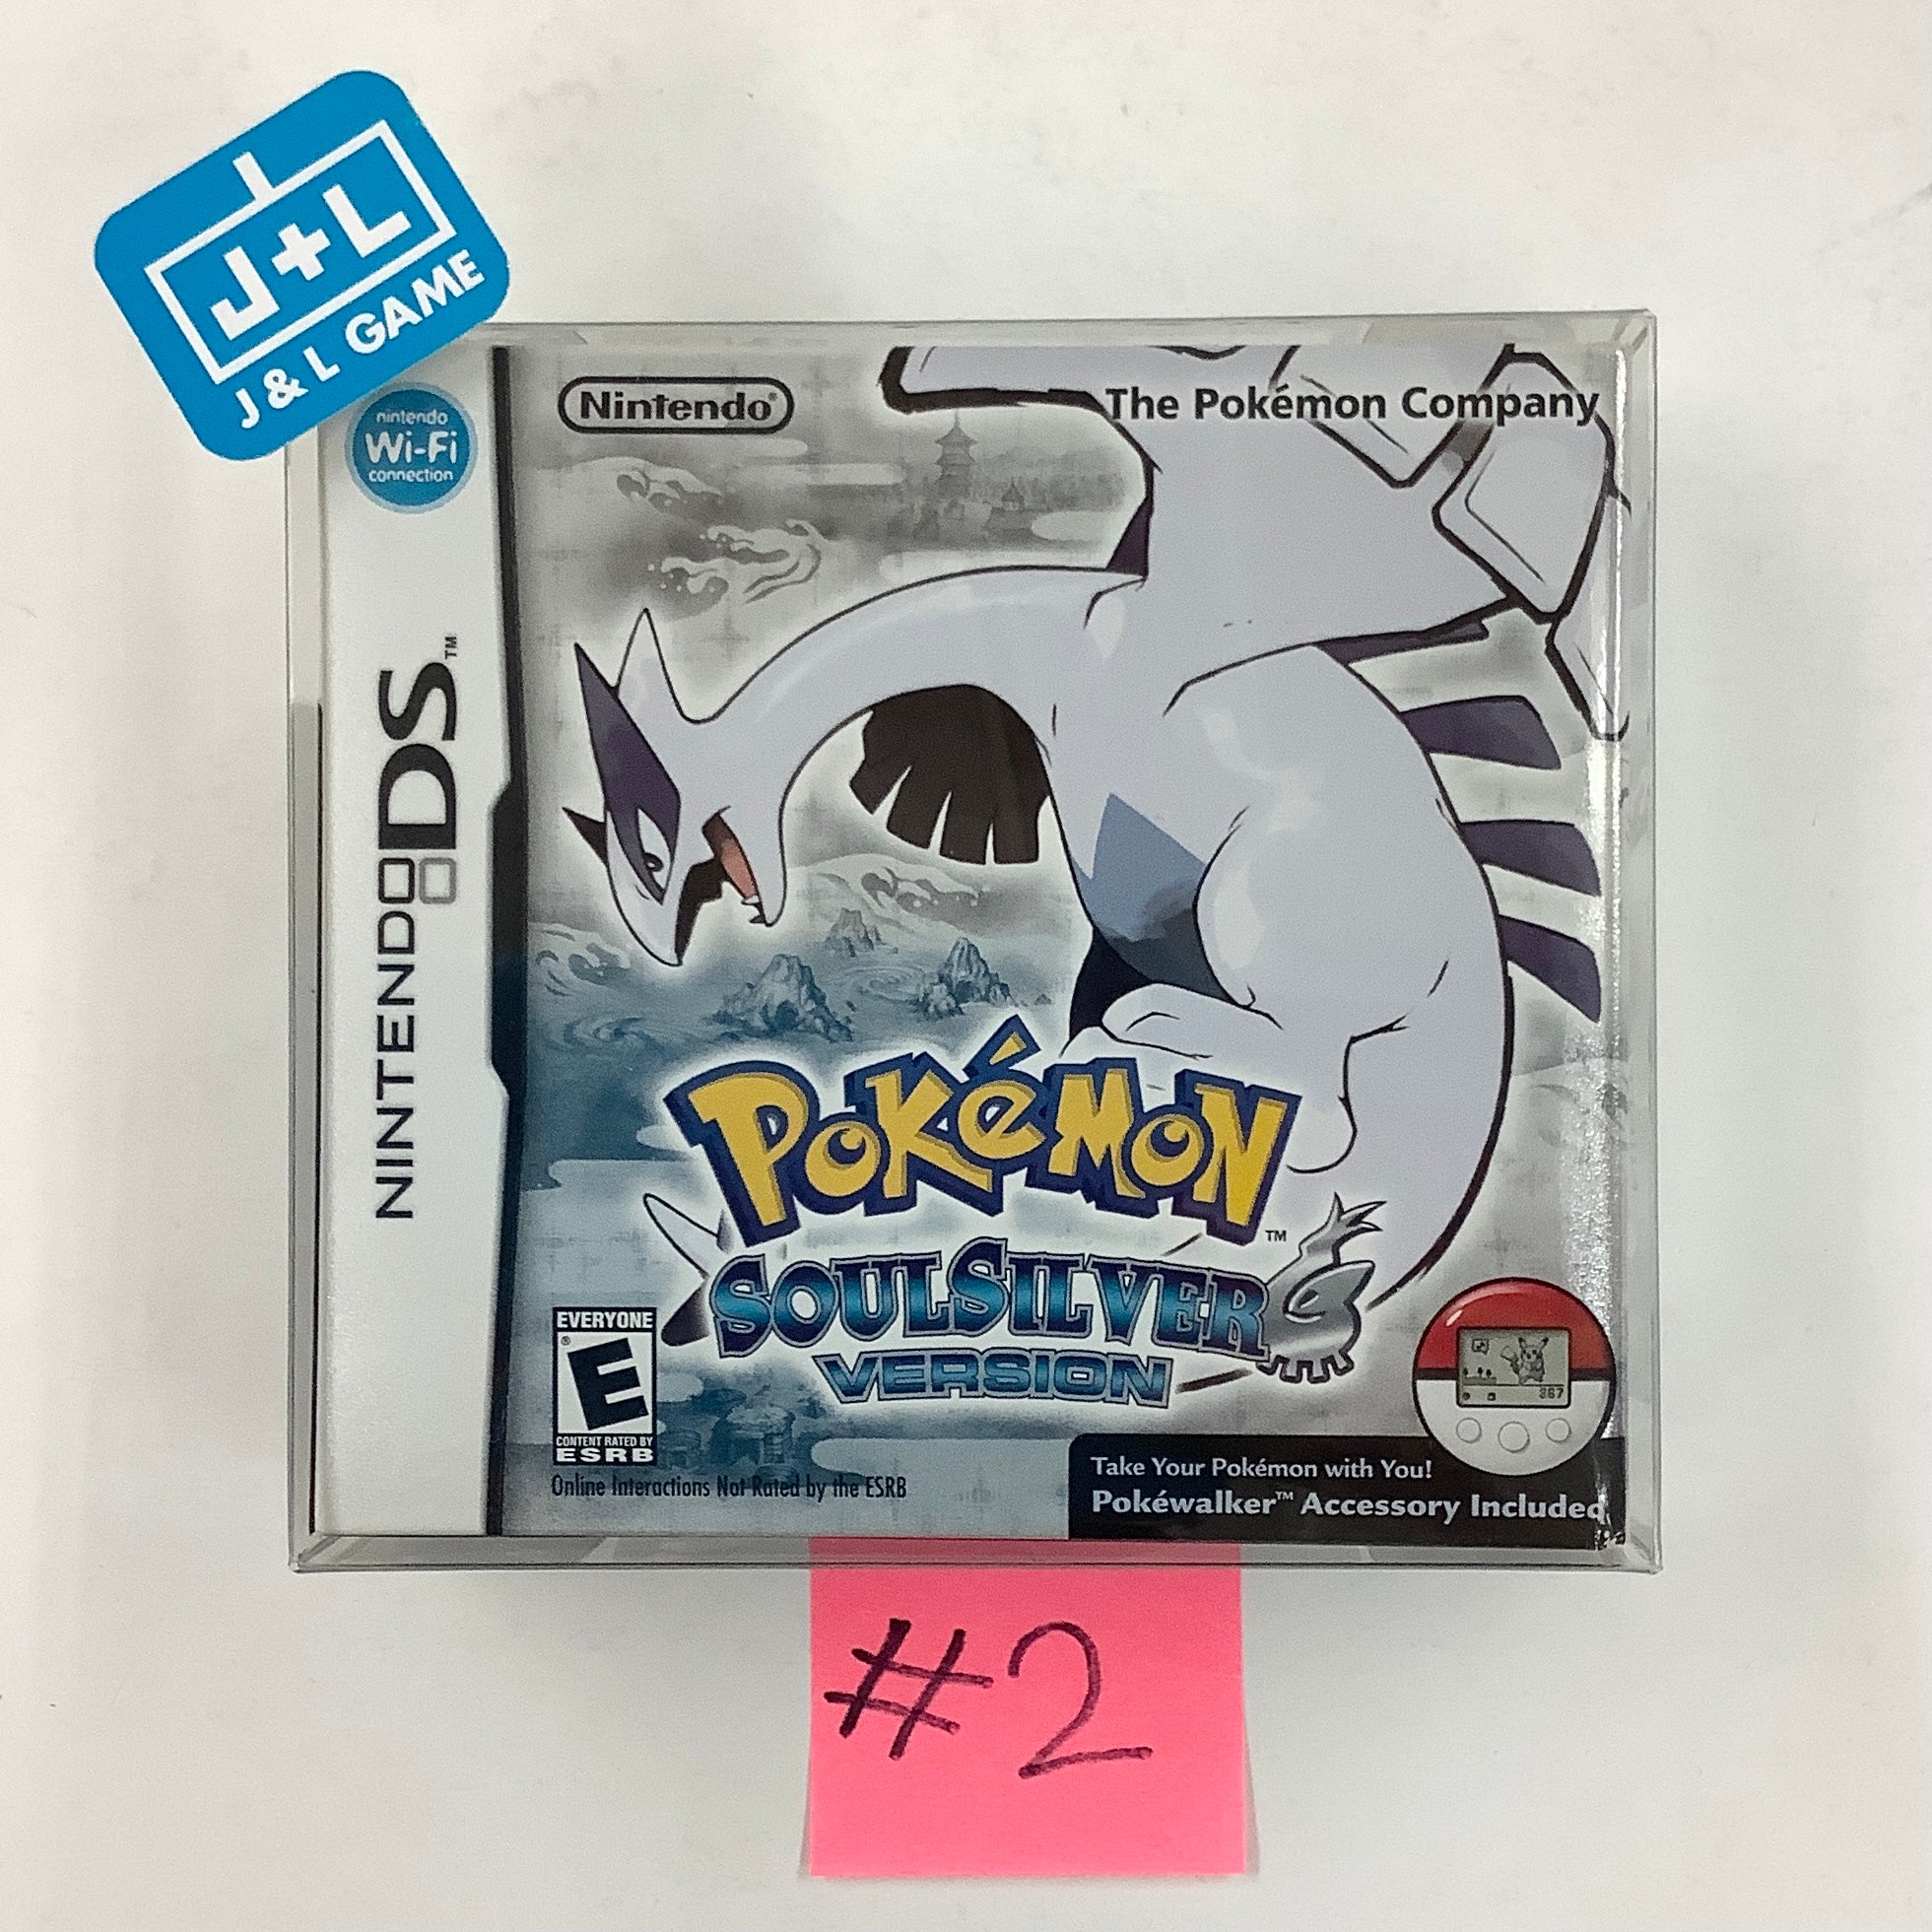 NDS Game US Version of Pokomon HeartGold & SoulSilver DS for NDS NDSI 3DS 